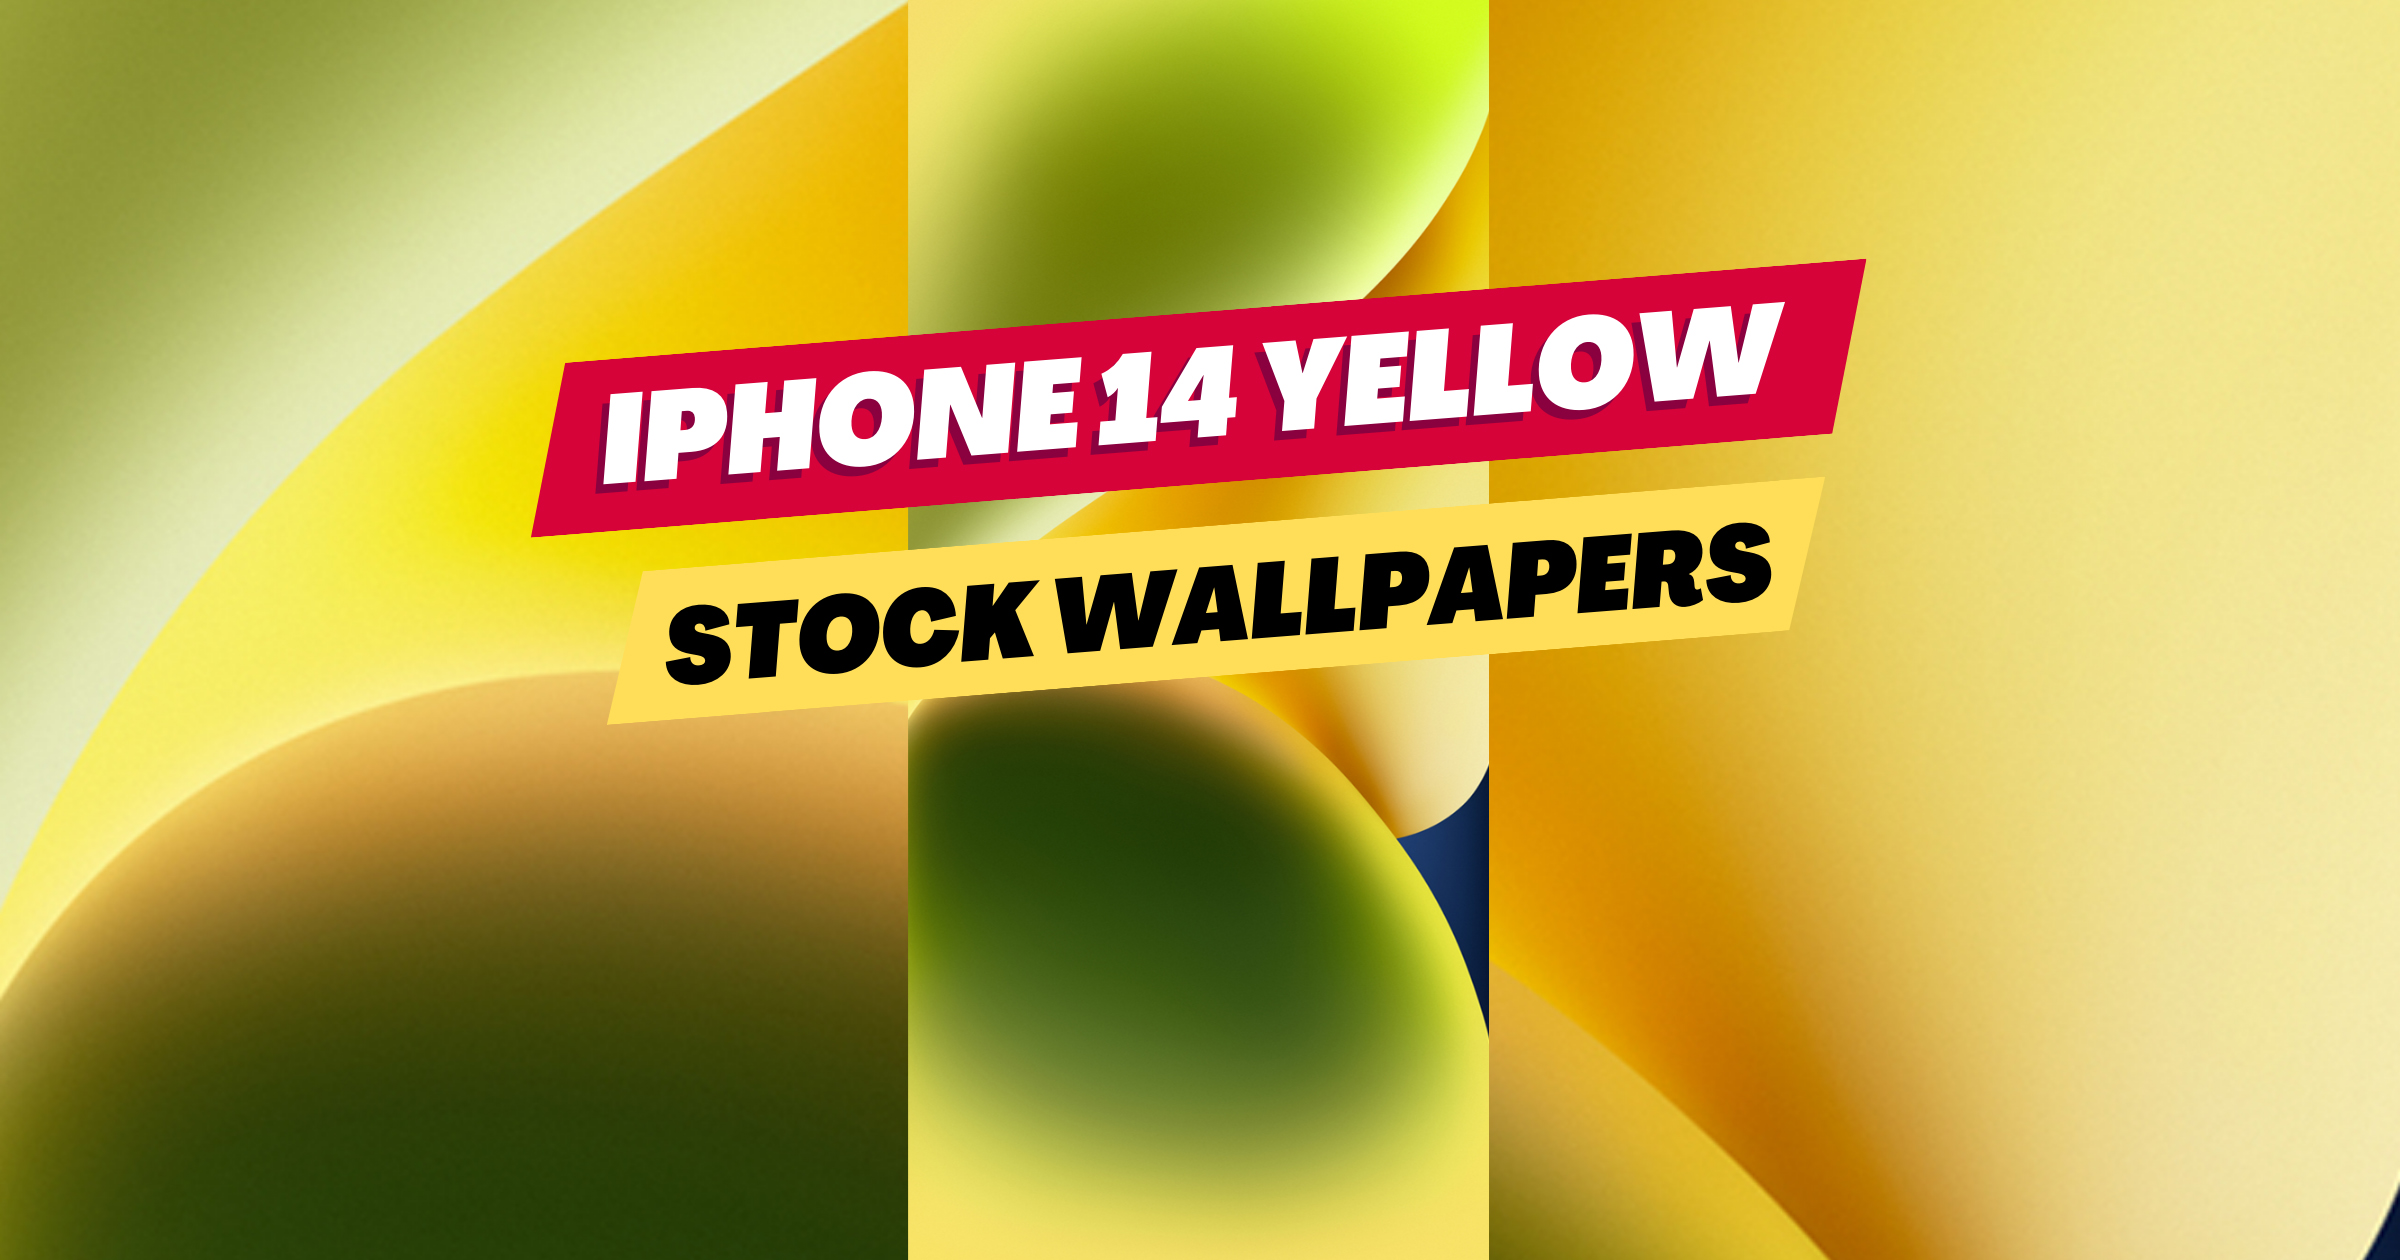 Download iPhone 14 Yellow Stock Wallpapers